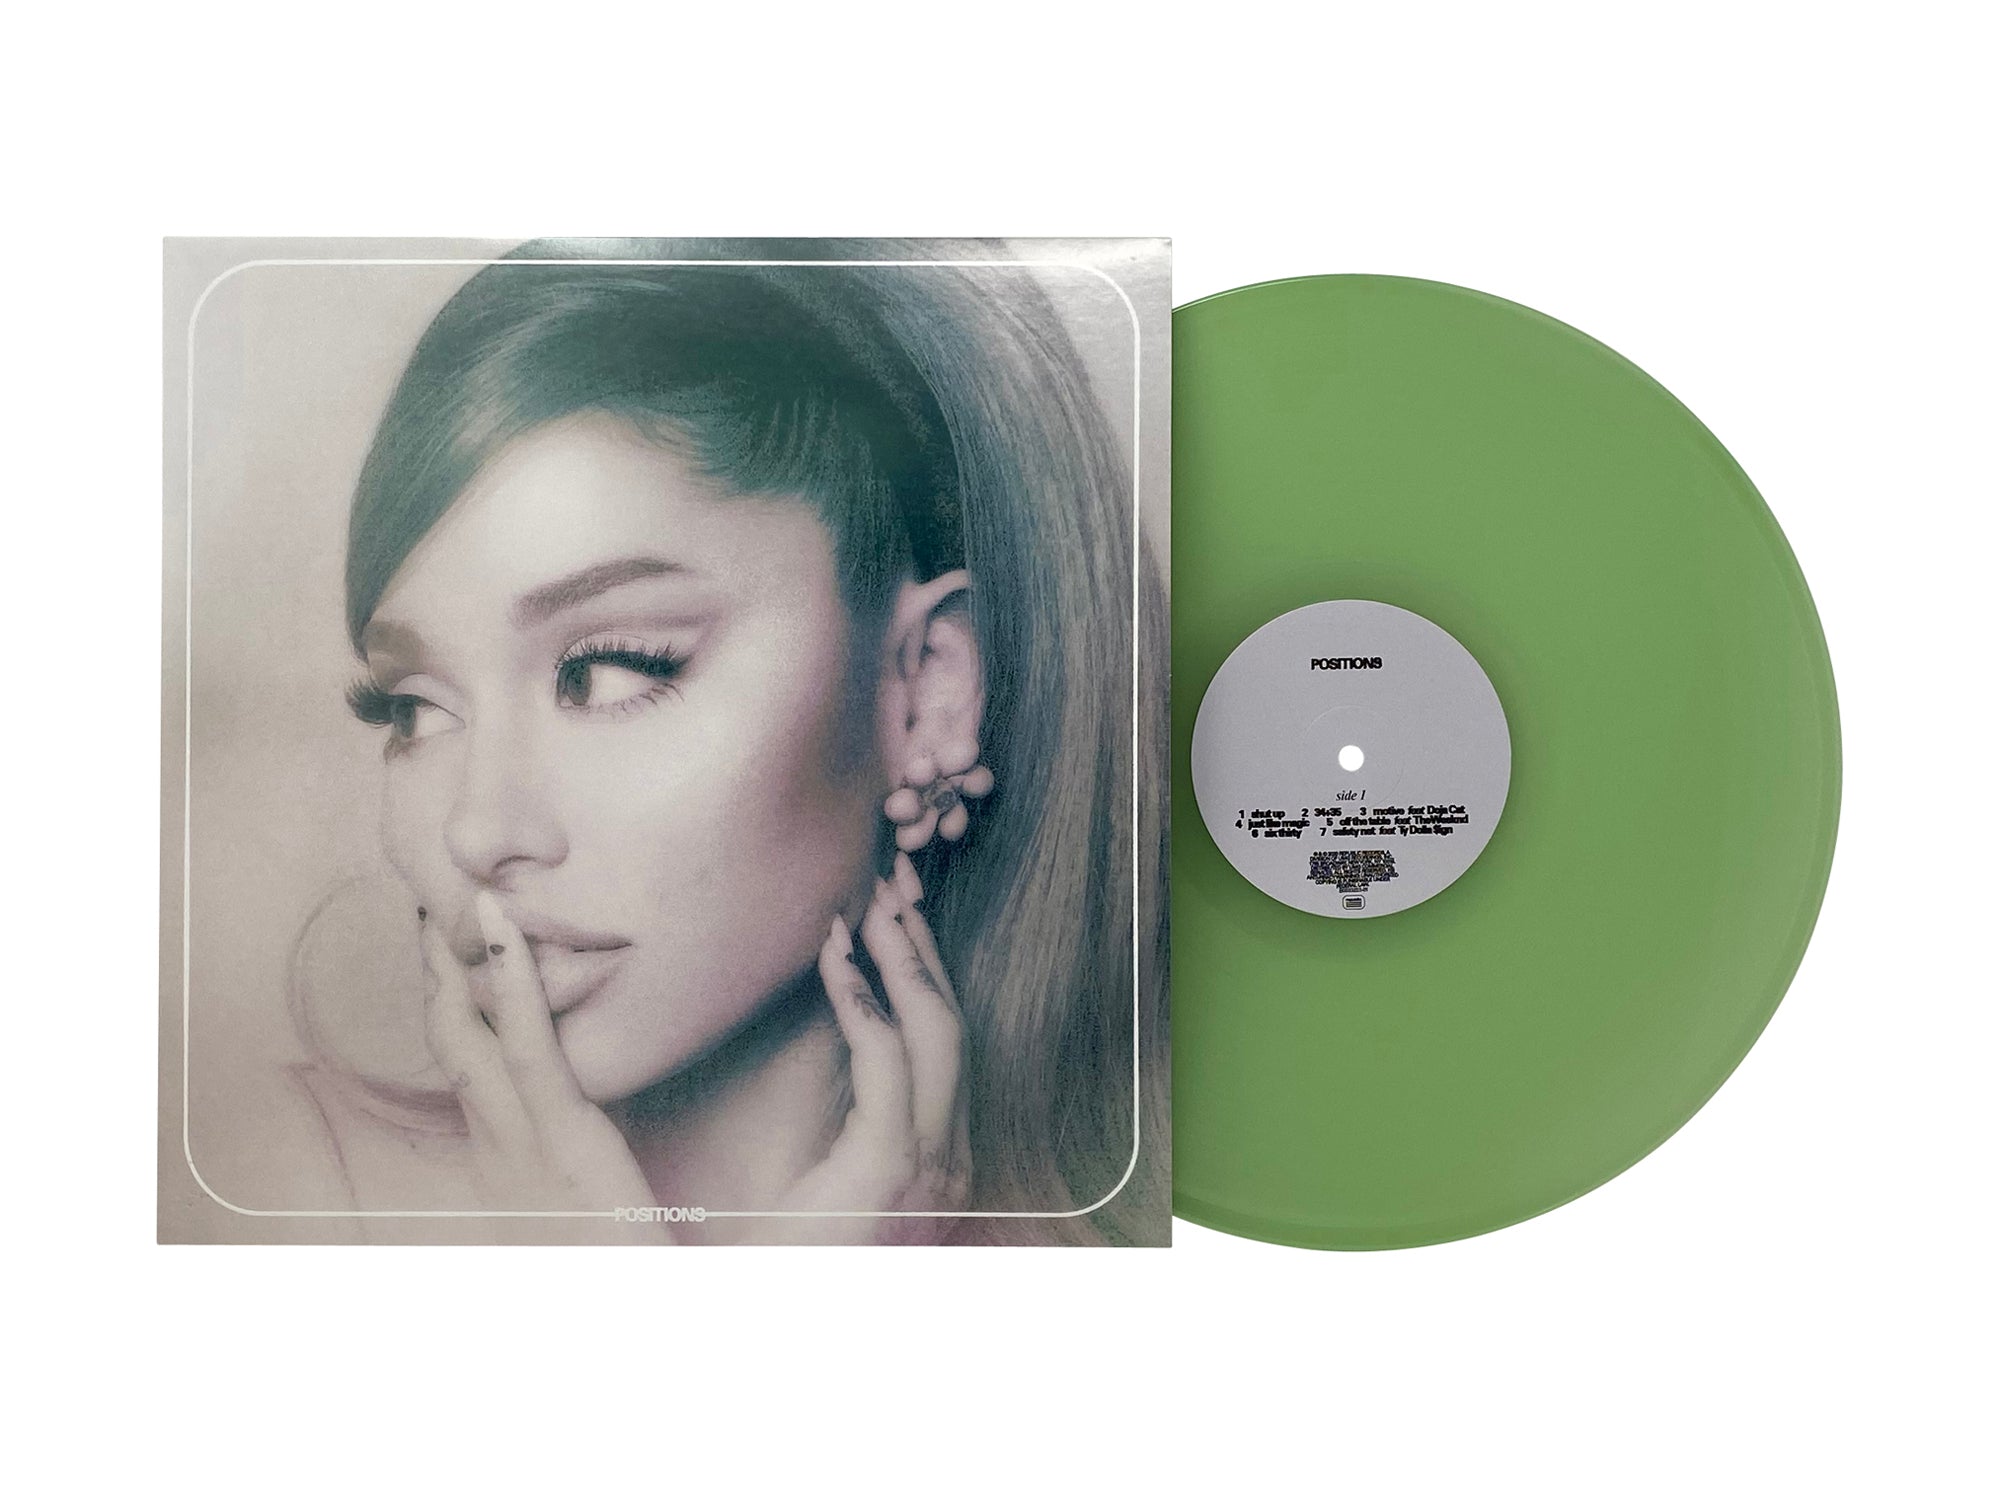 Ariana Grande Positions 1LP Vinyl Limited Coke Bottle Clear 12 Record